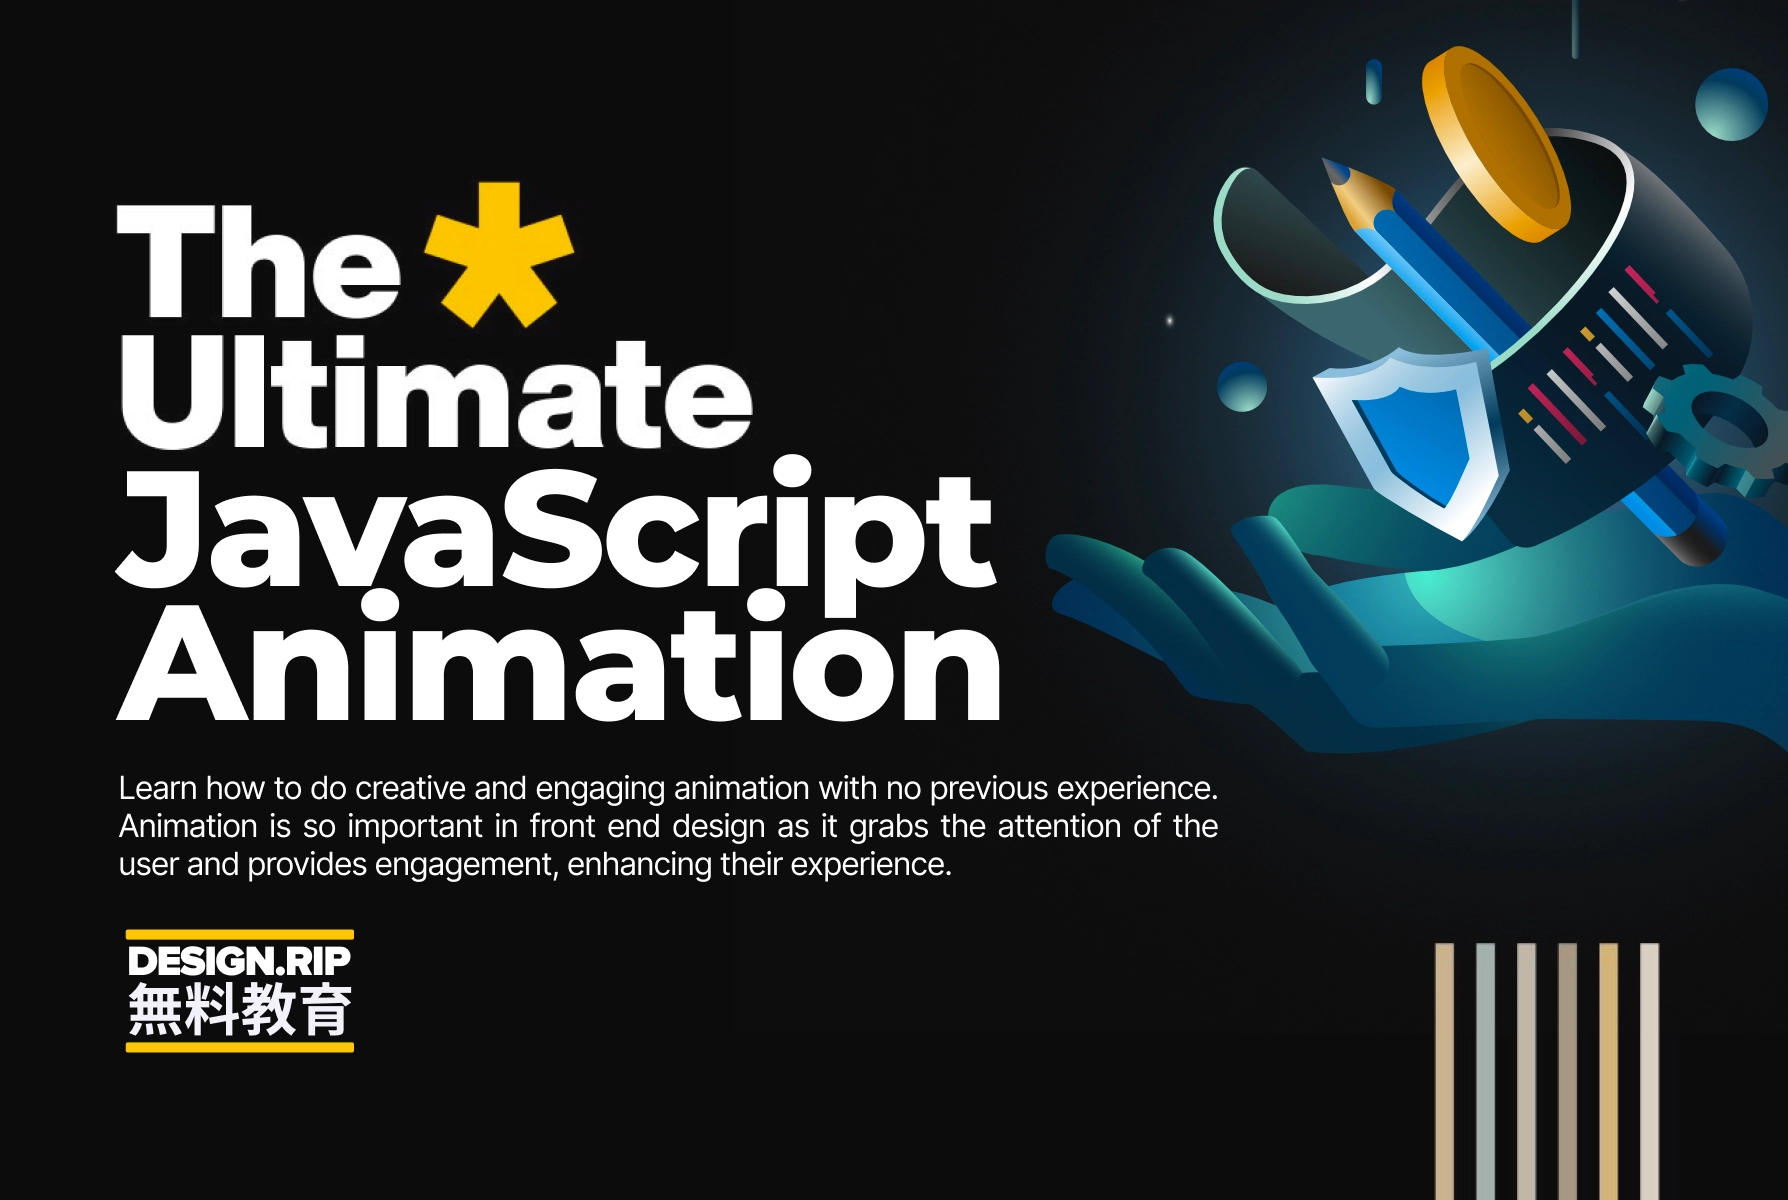 [VIP] DevelopedbyED: The Ultimate JavaScript Animation Course